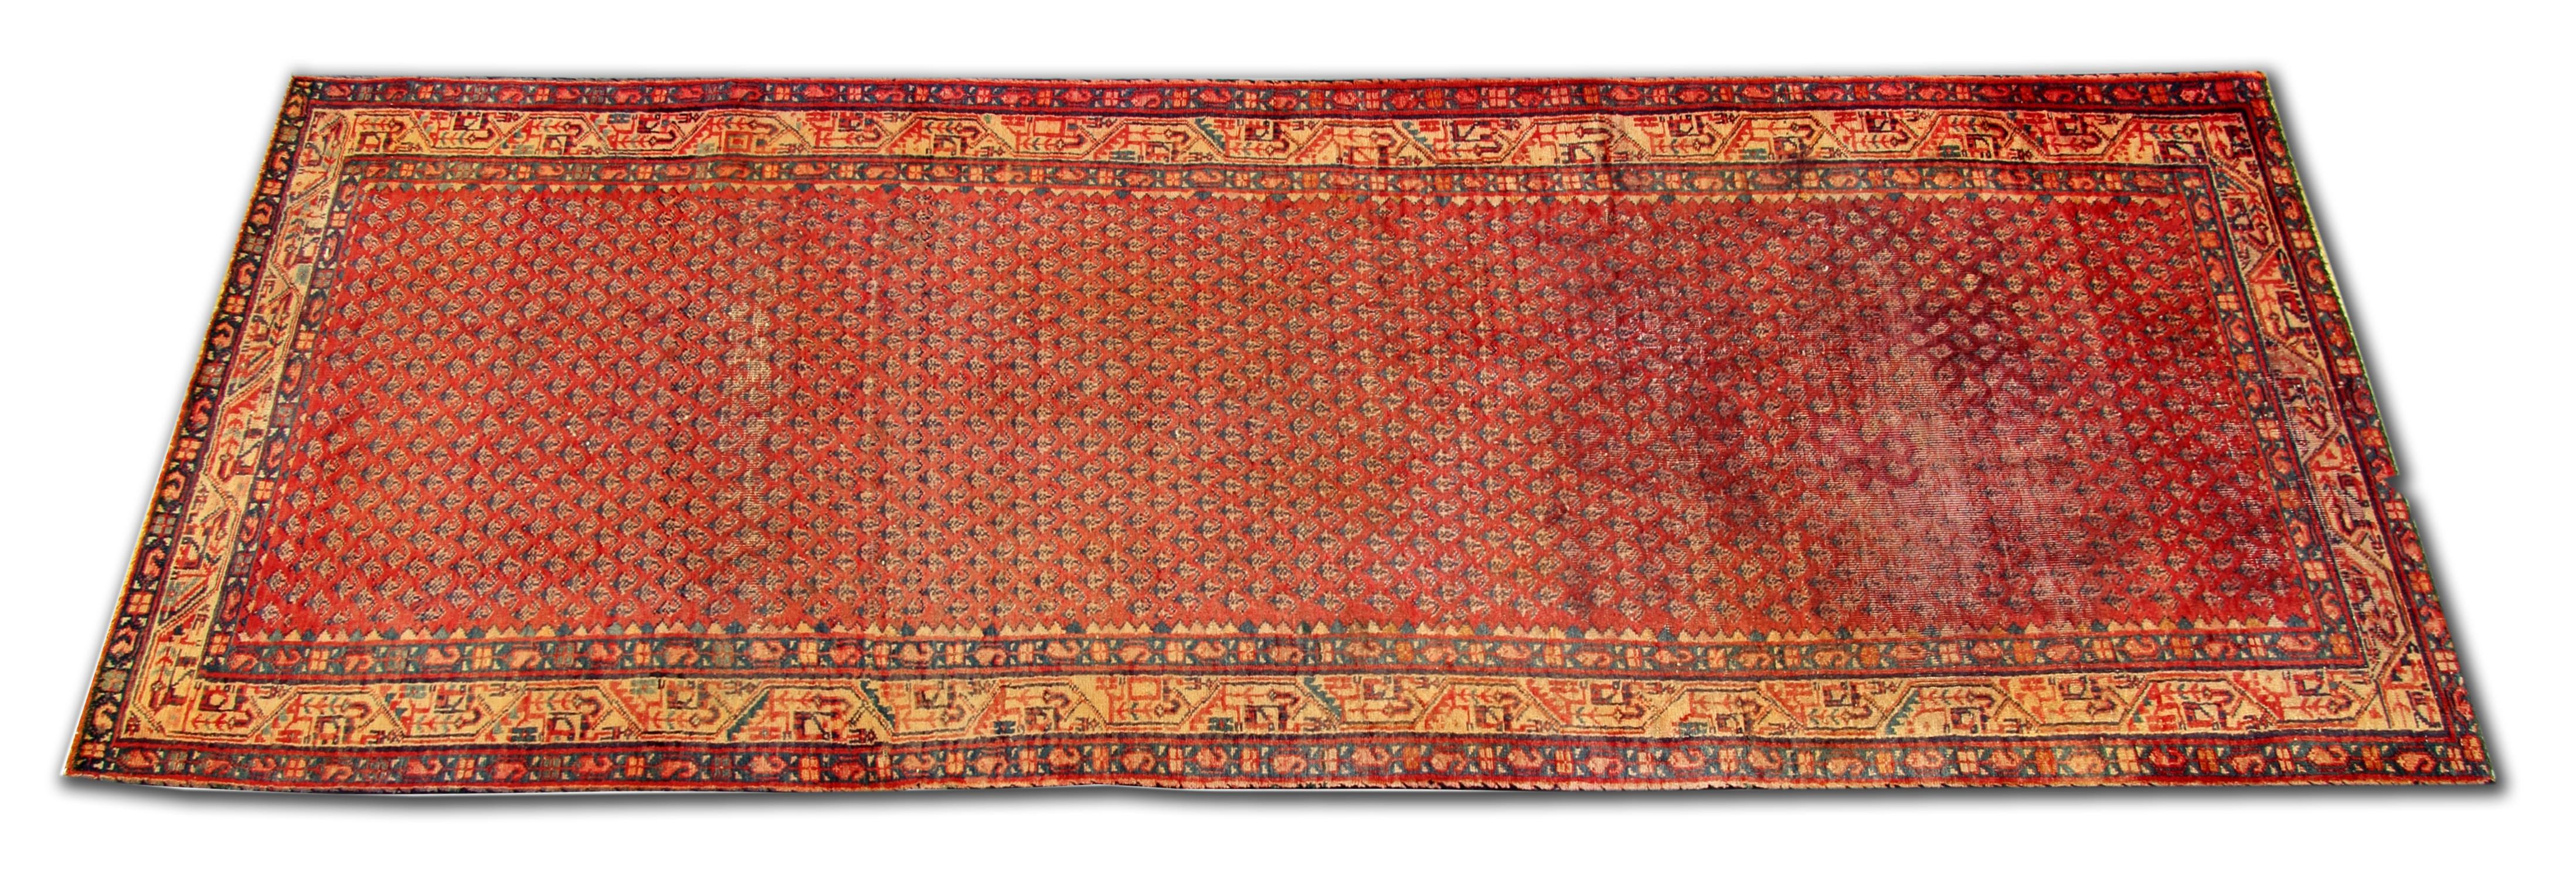 This fine red wool runner rug was woven by hand in the late 20th century and features a traditional repeating pattern central design, woven in accents of blue and beige on deep red background. This has then been framed by a layered border that